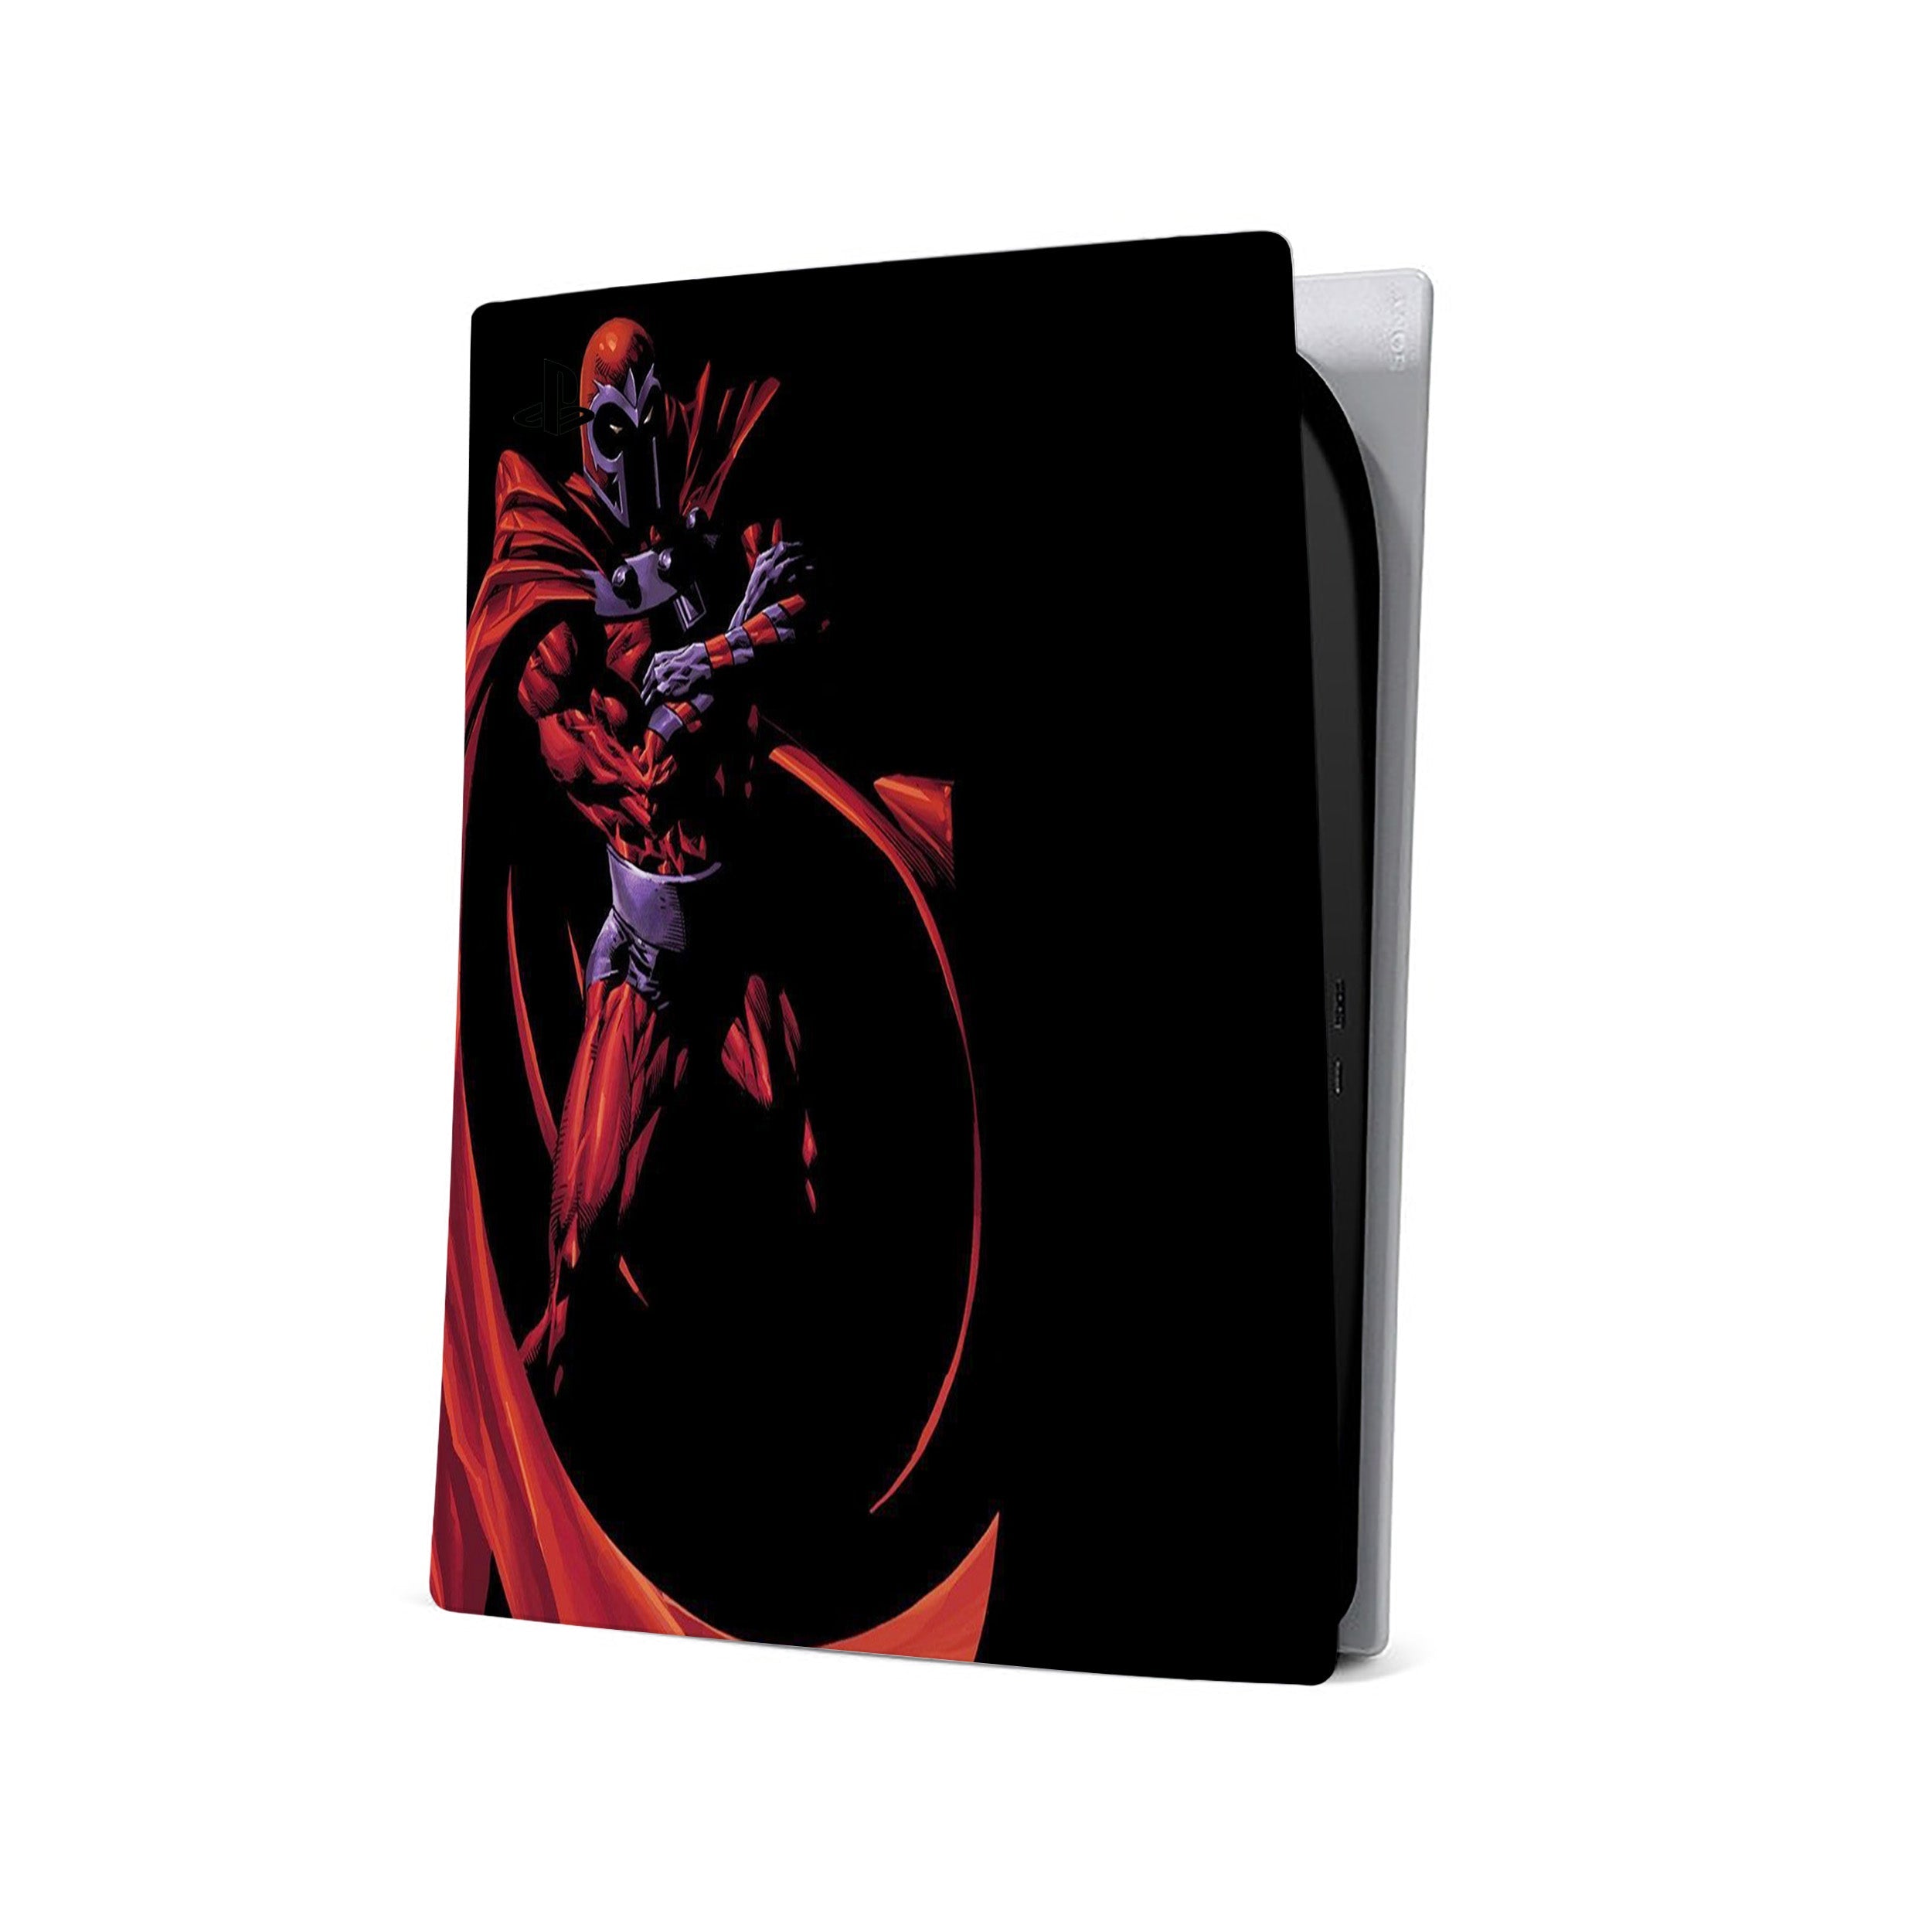 A video game skin featuring a Marvel X Men Magneto design for the PS5.